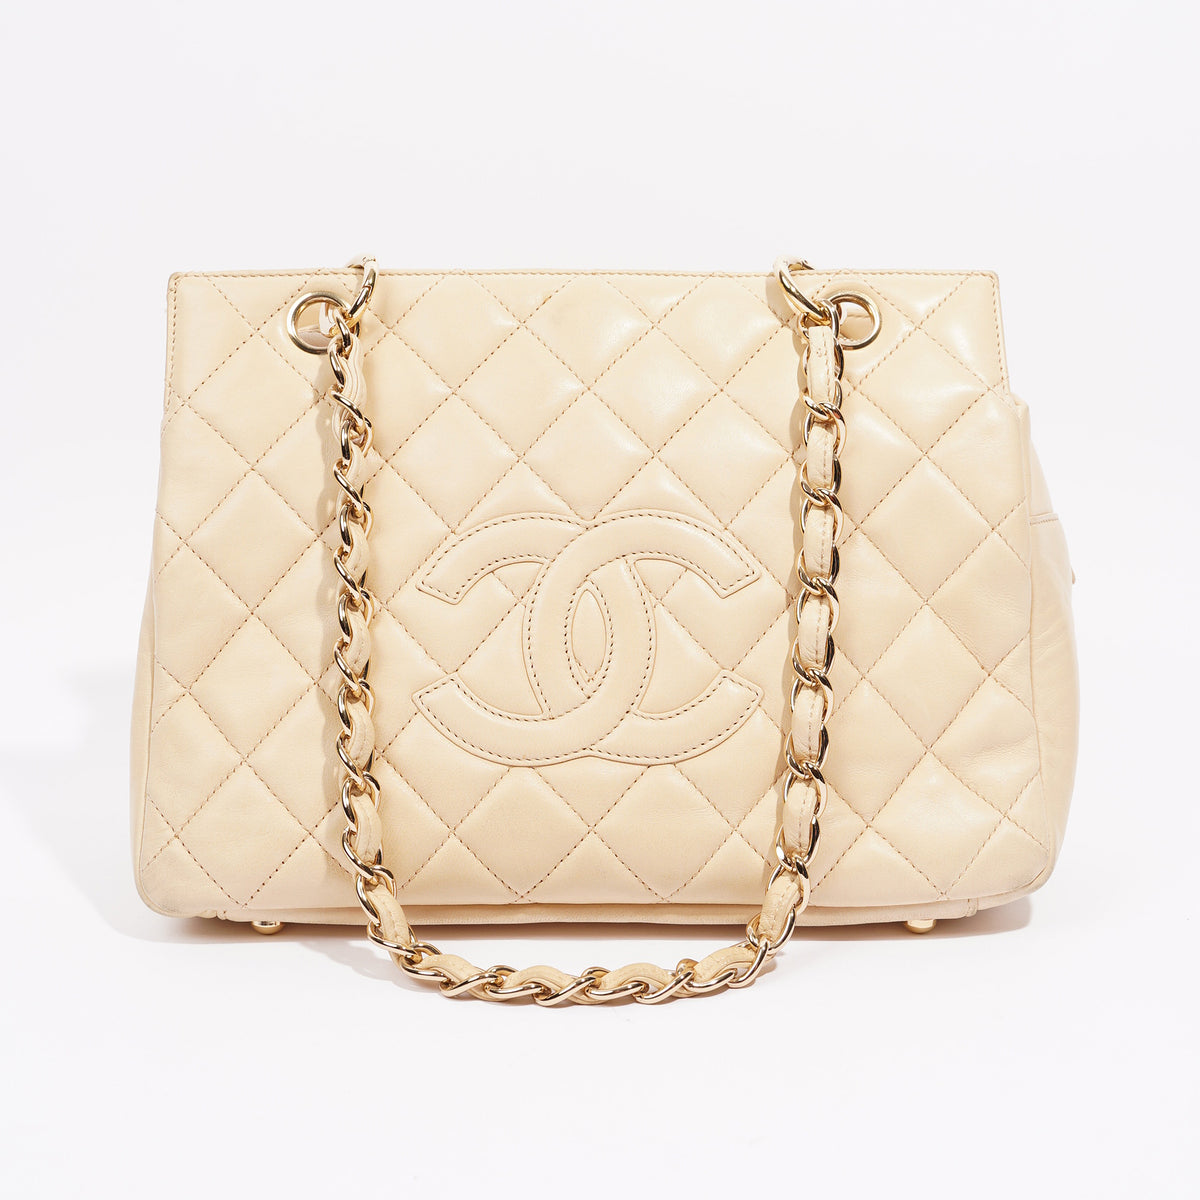 chanel leather shopping tote bag